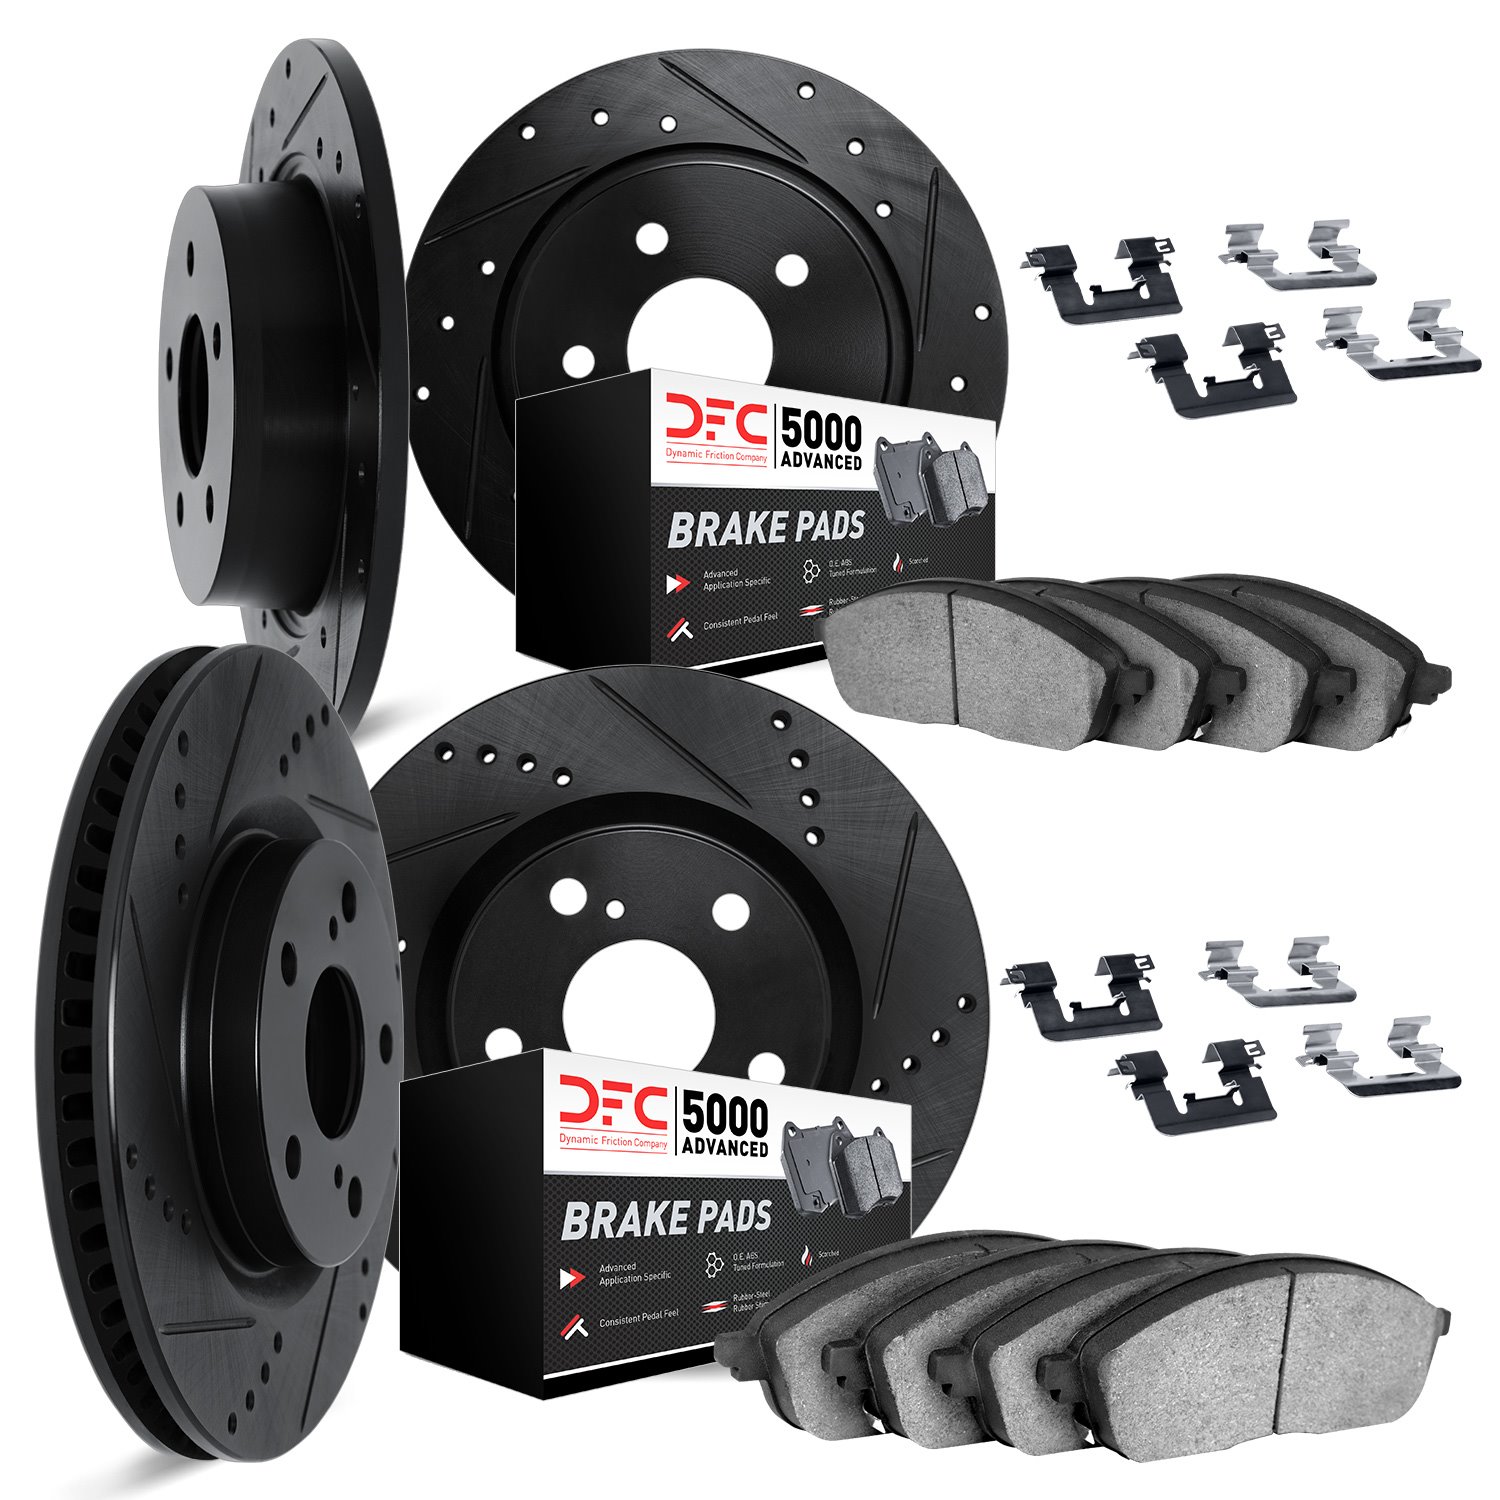 8514-32012 Drilled/Slotted Brake Rotors w/5000 Advanced Brake Pads Kit & Hardware [Black], Fits Select Mini, Position: Front and